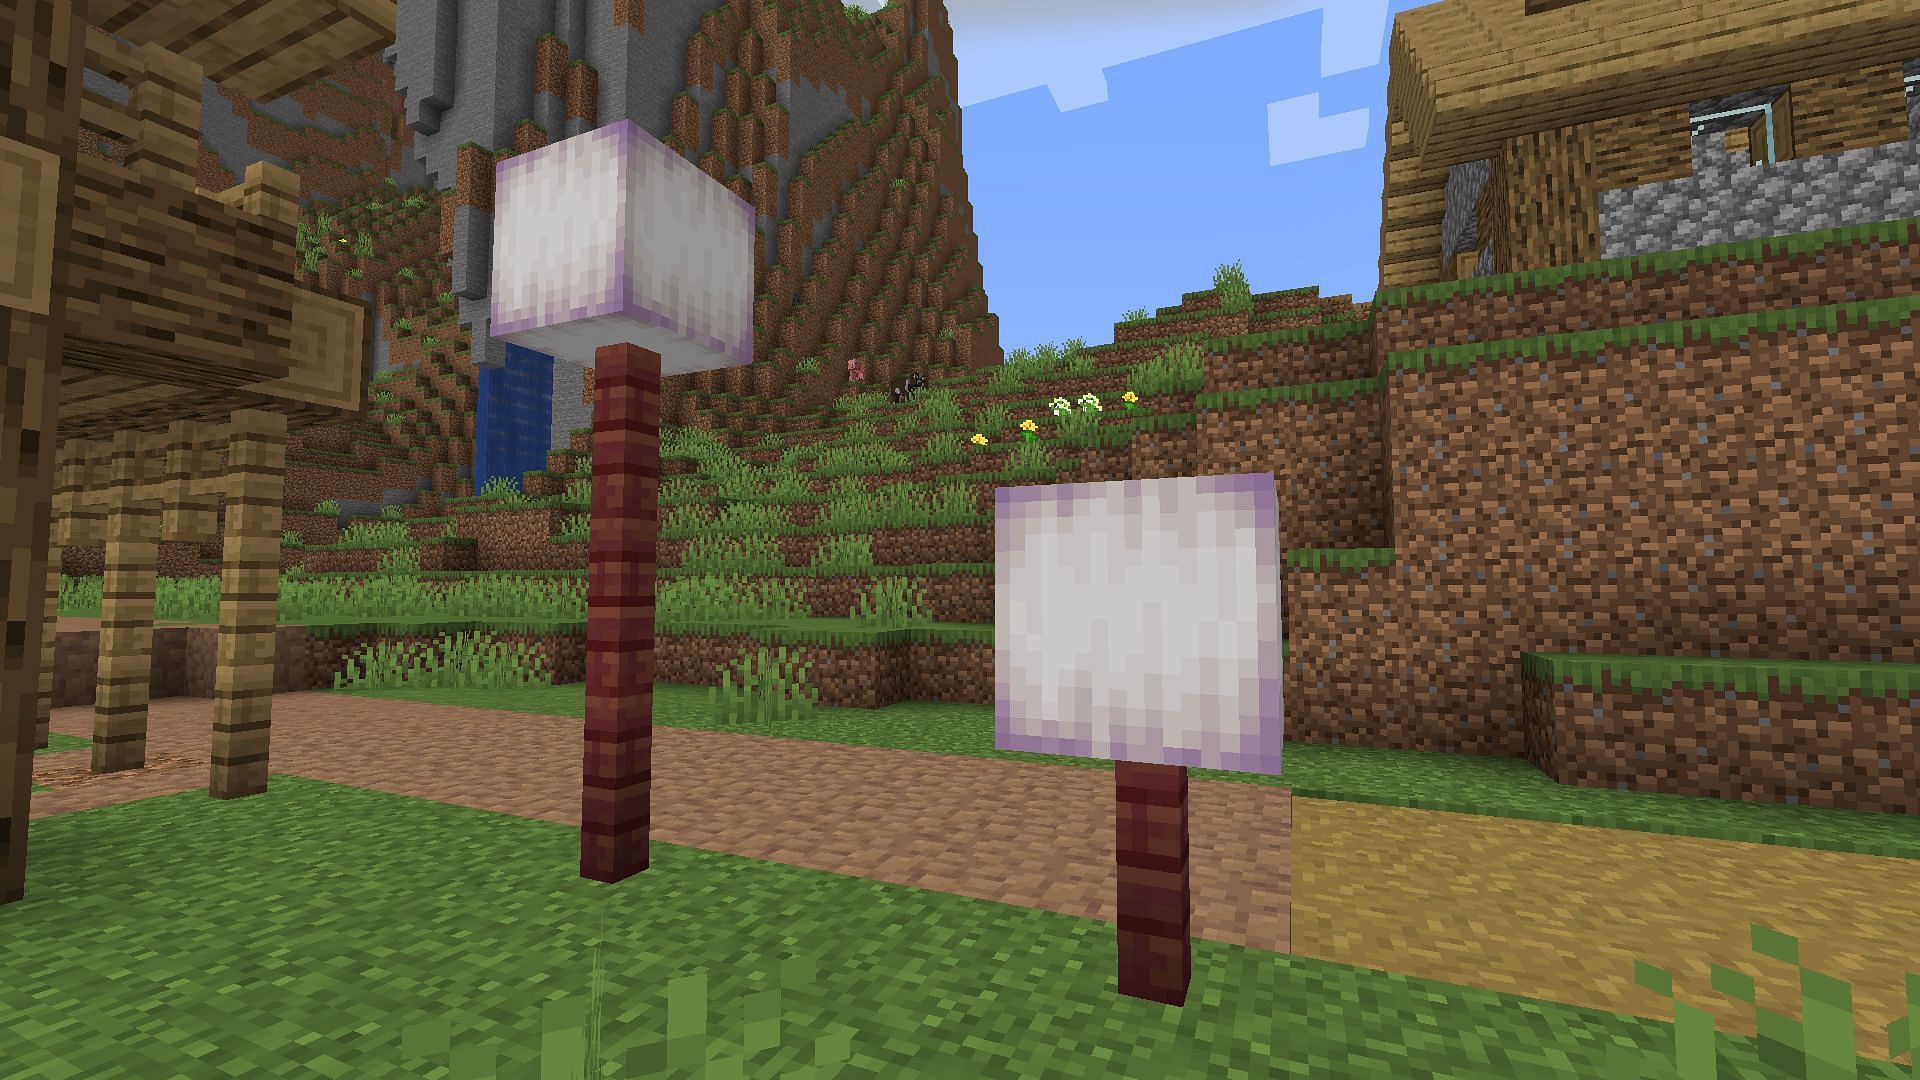 Froglights are excellent decorative blocks that can be used in several builds (Image via Minecraft 1.19 update)